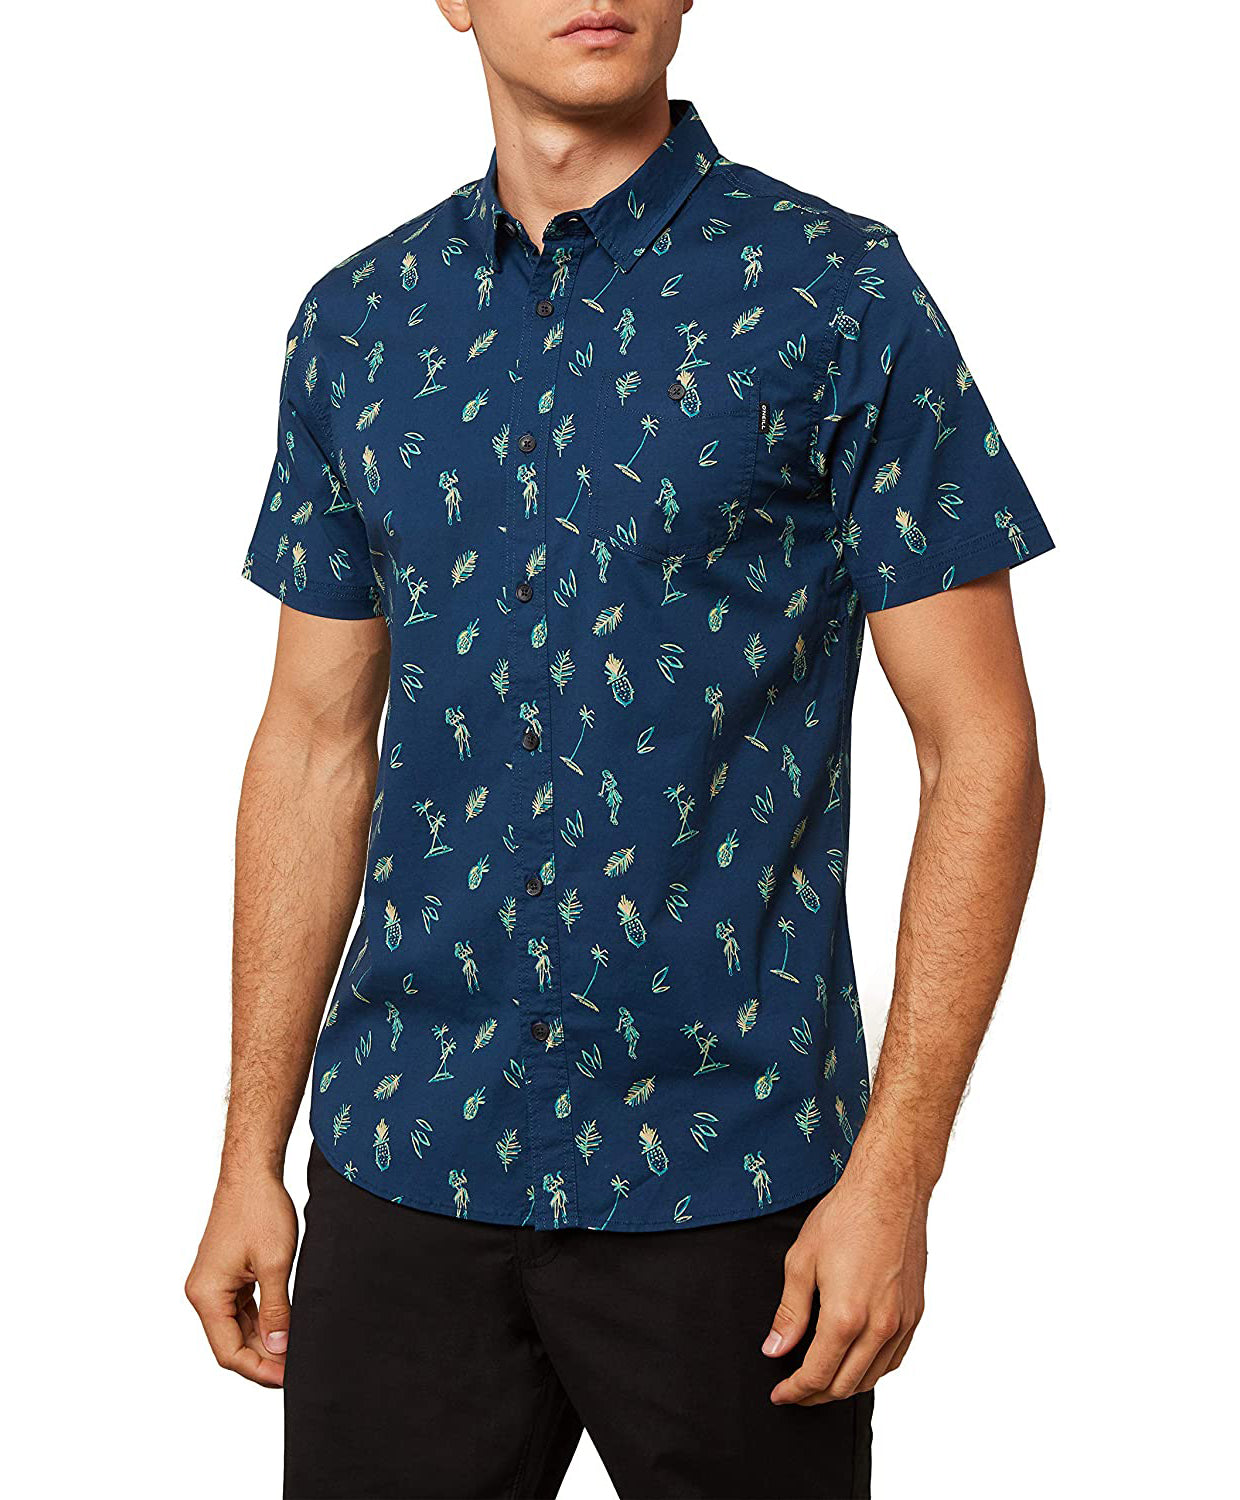 O'Neill Tame SS Mens Woven Tee Navy M